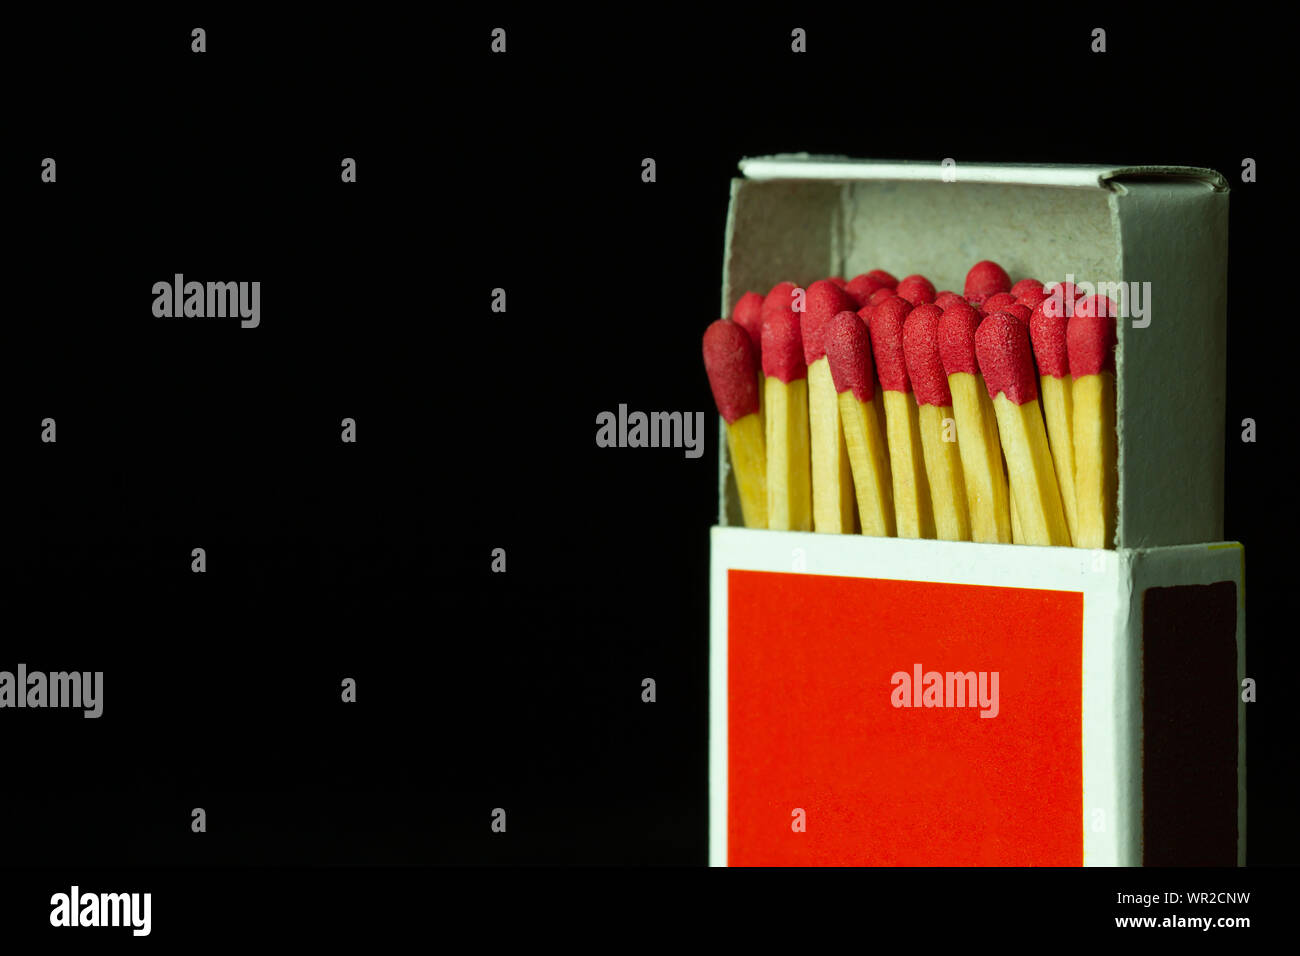 Matches stick in red paper box on black background. Closeup and copy space. Stock Photo